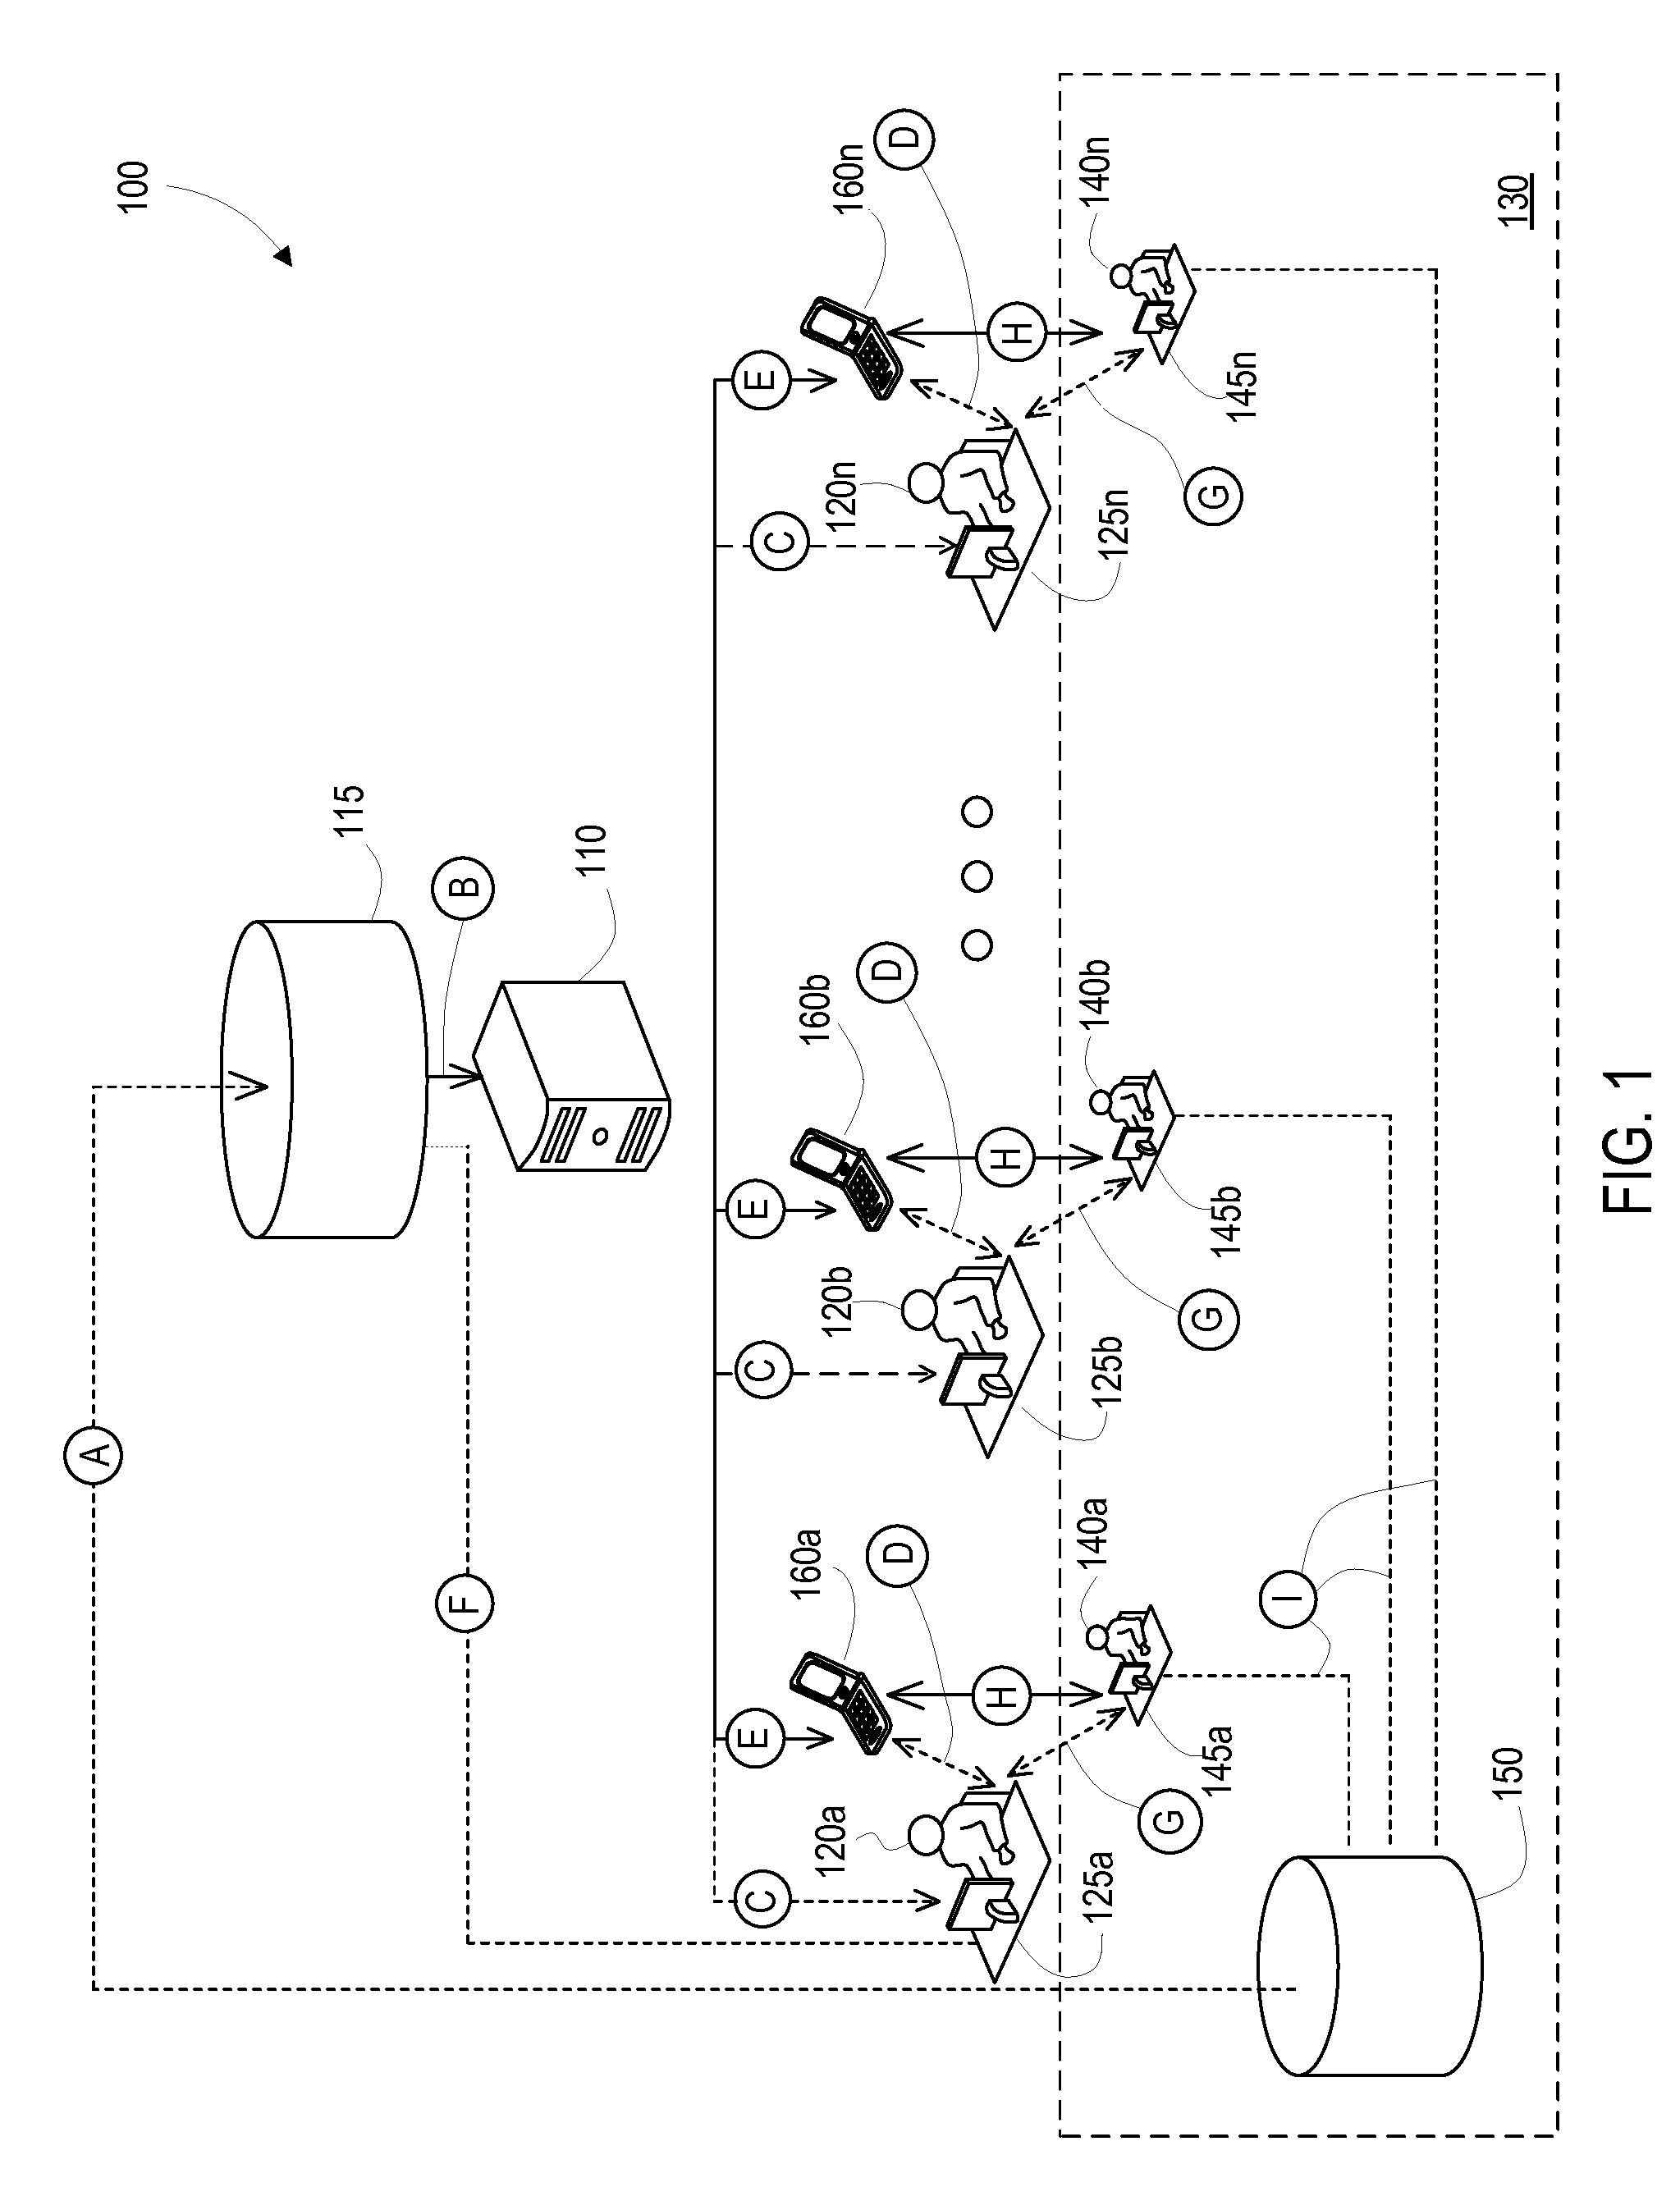 Systems and methods for handling voluminous calls to cell phones using transfer agent process